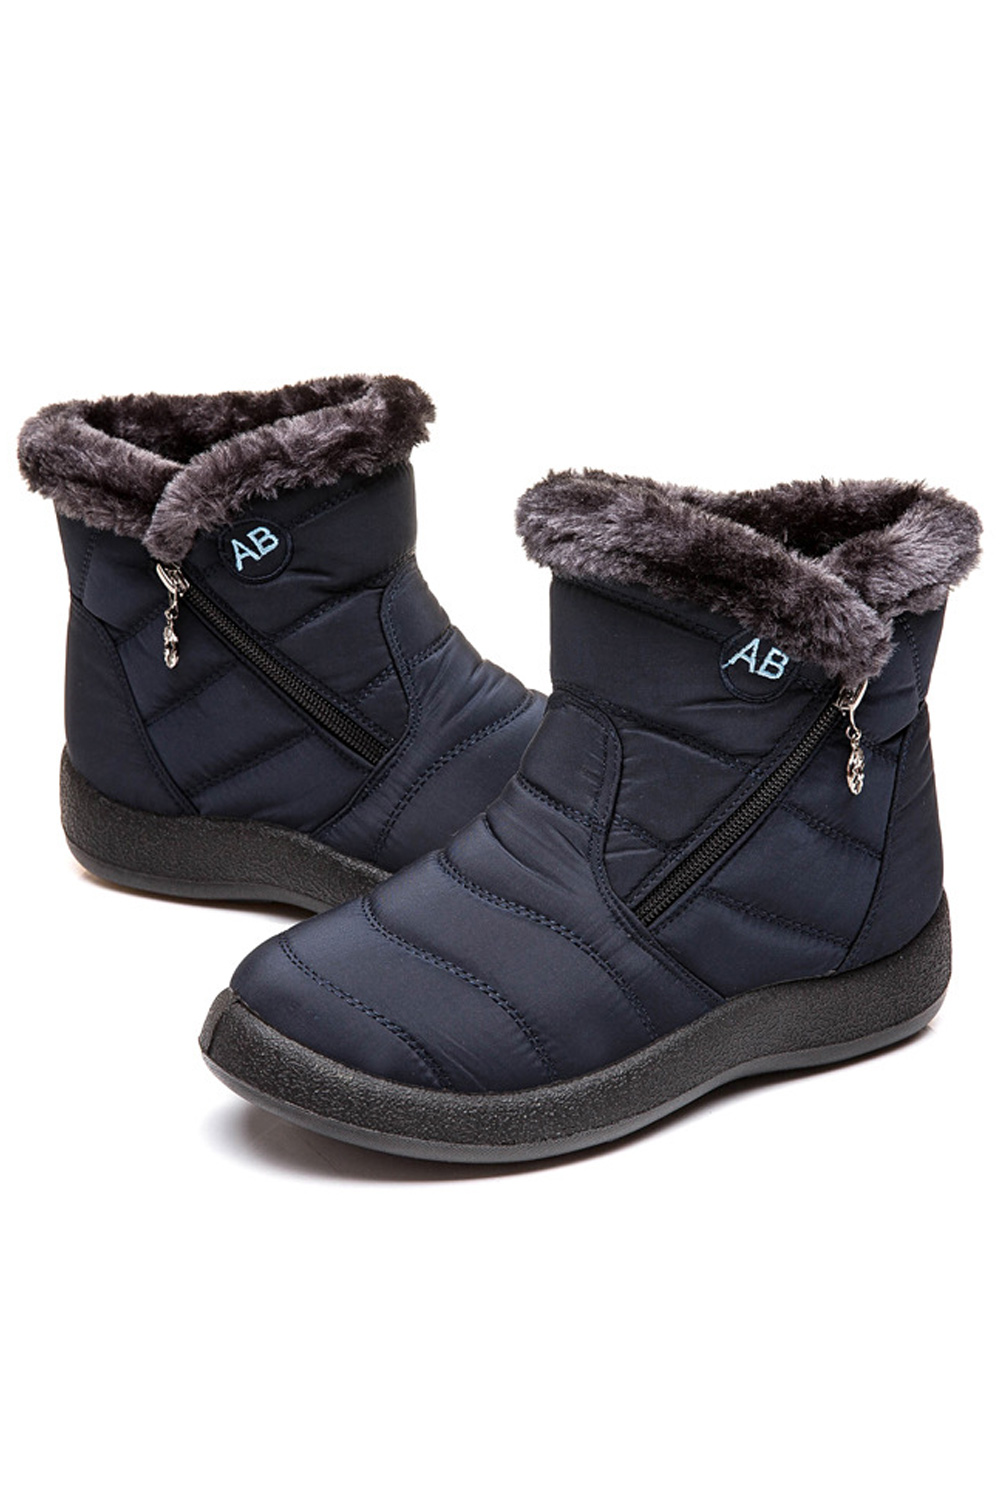 Tom Carry Women Thick Rubber Flat Surface Solid Pattern Casual High Top Warm Winter Boots